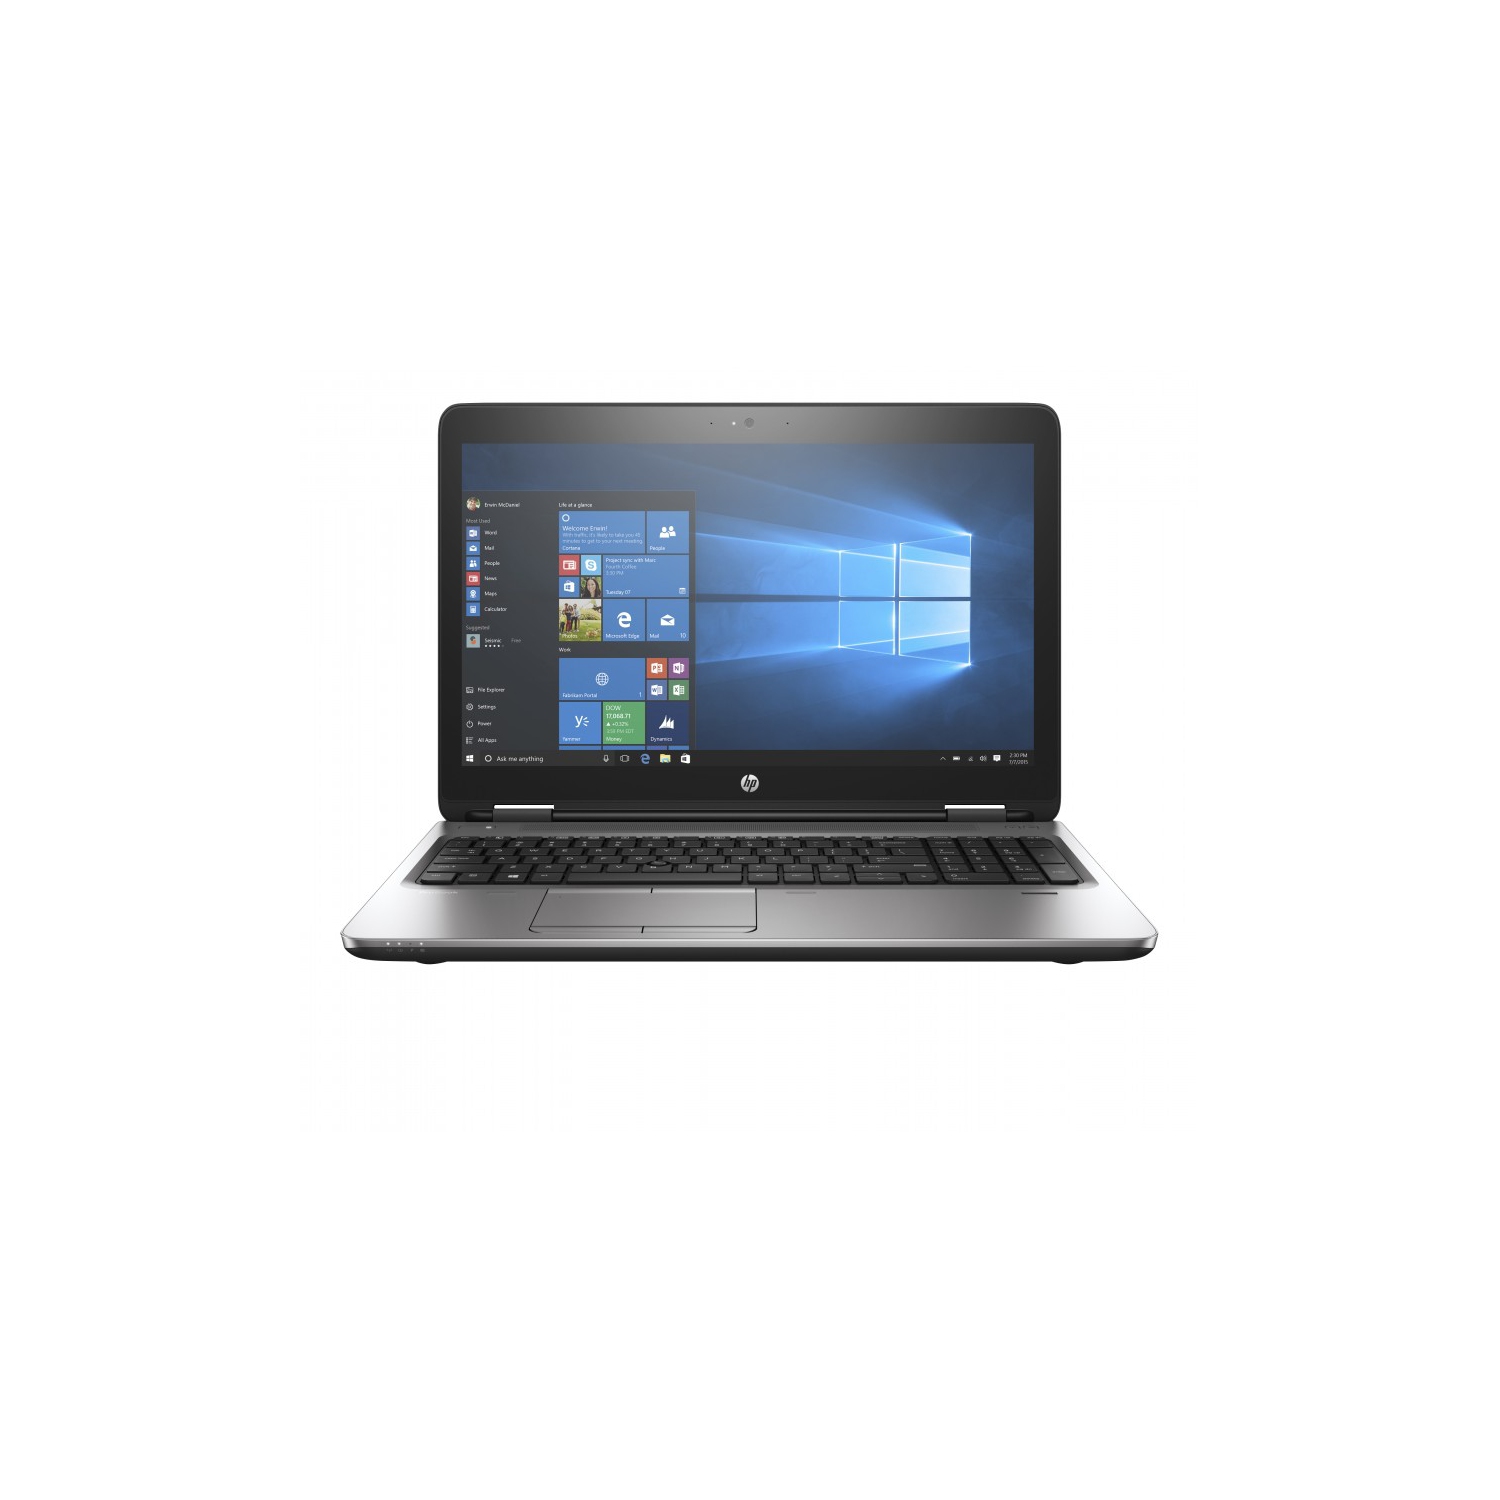 Refurbished (Excellent) - HP ProBook 650 G2-15.6-inch LCD Business Laptop Computer Core i5 6th Gen 8GB RAM ,512GB SSD, Webcam , Wins 10 Pro